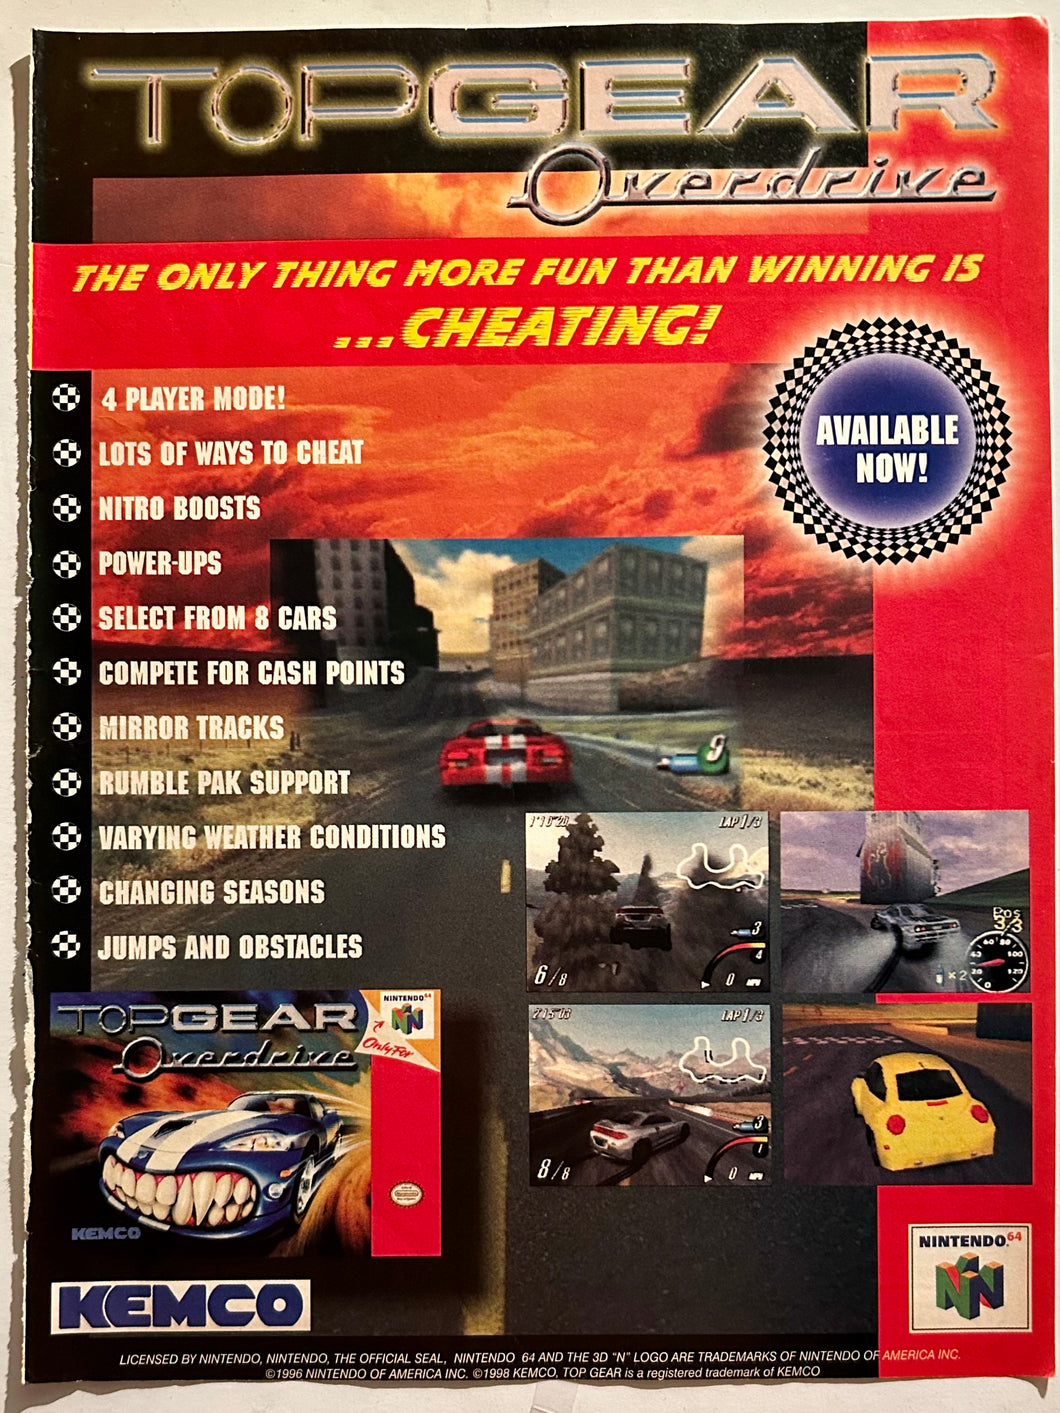 Top Gear Overdrive - N64 - Original Vintage Advertisement - Print Ads - Laminated A4 Poster